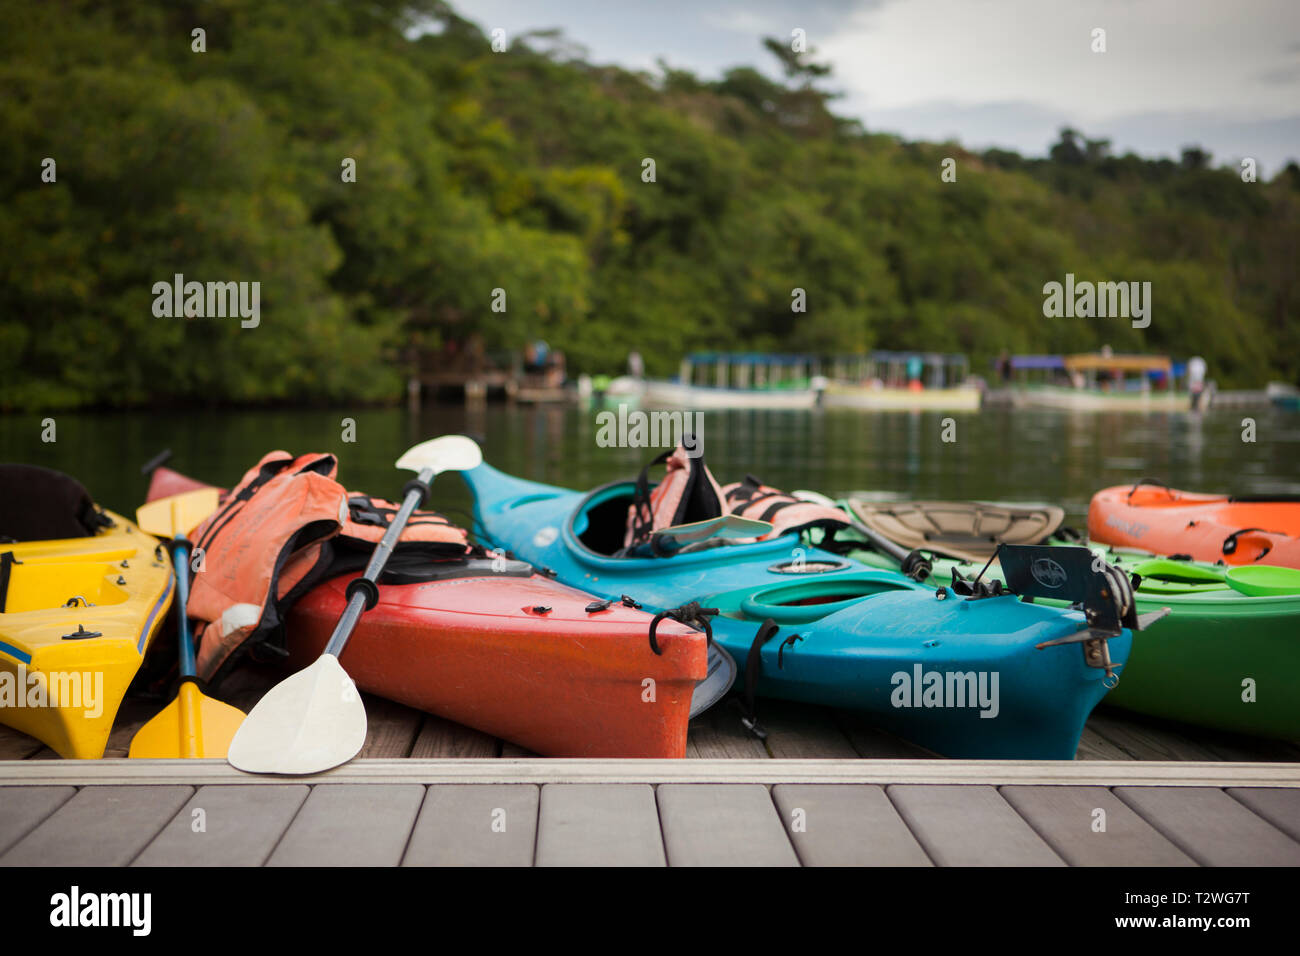 A row of colorful ocean kayaks sitting in a row on a dock. Panama, Bocas Del Toro. Stock Photo